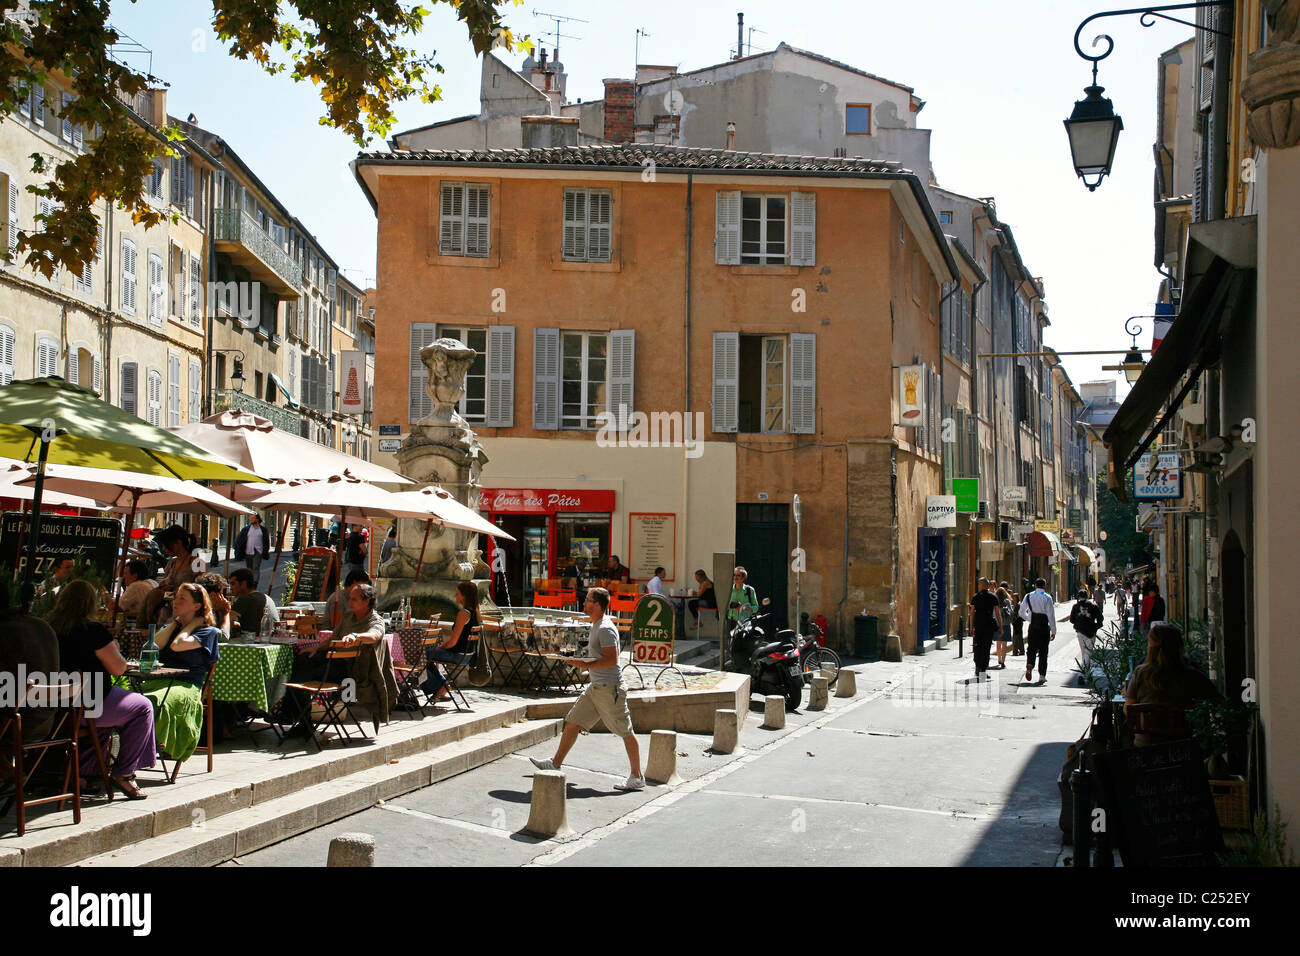 Outdoors restaurant in the Vieil Aix, the old quarter of Aix en Provence, Bouches du Rhone, Provence, France. Stock Photo